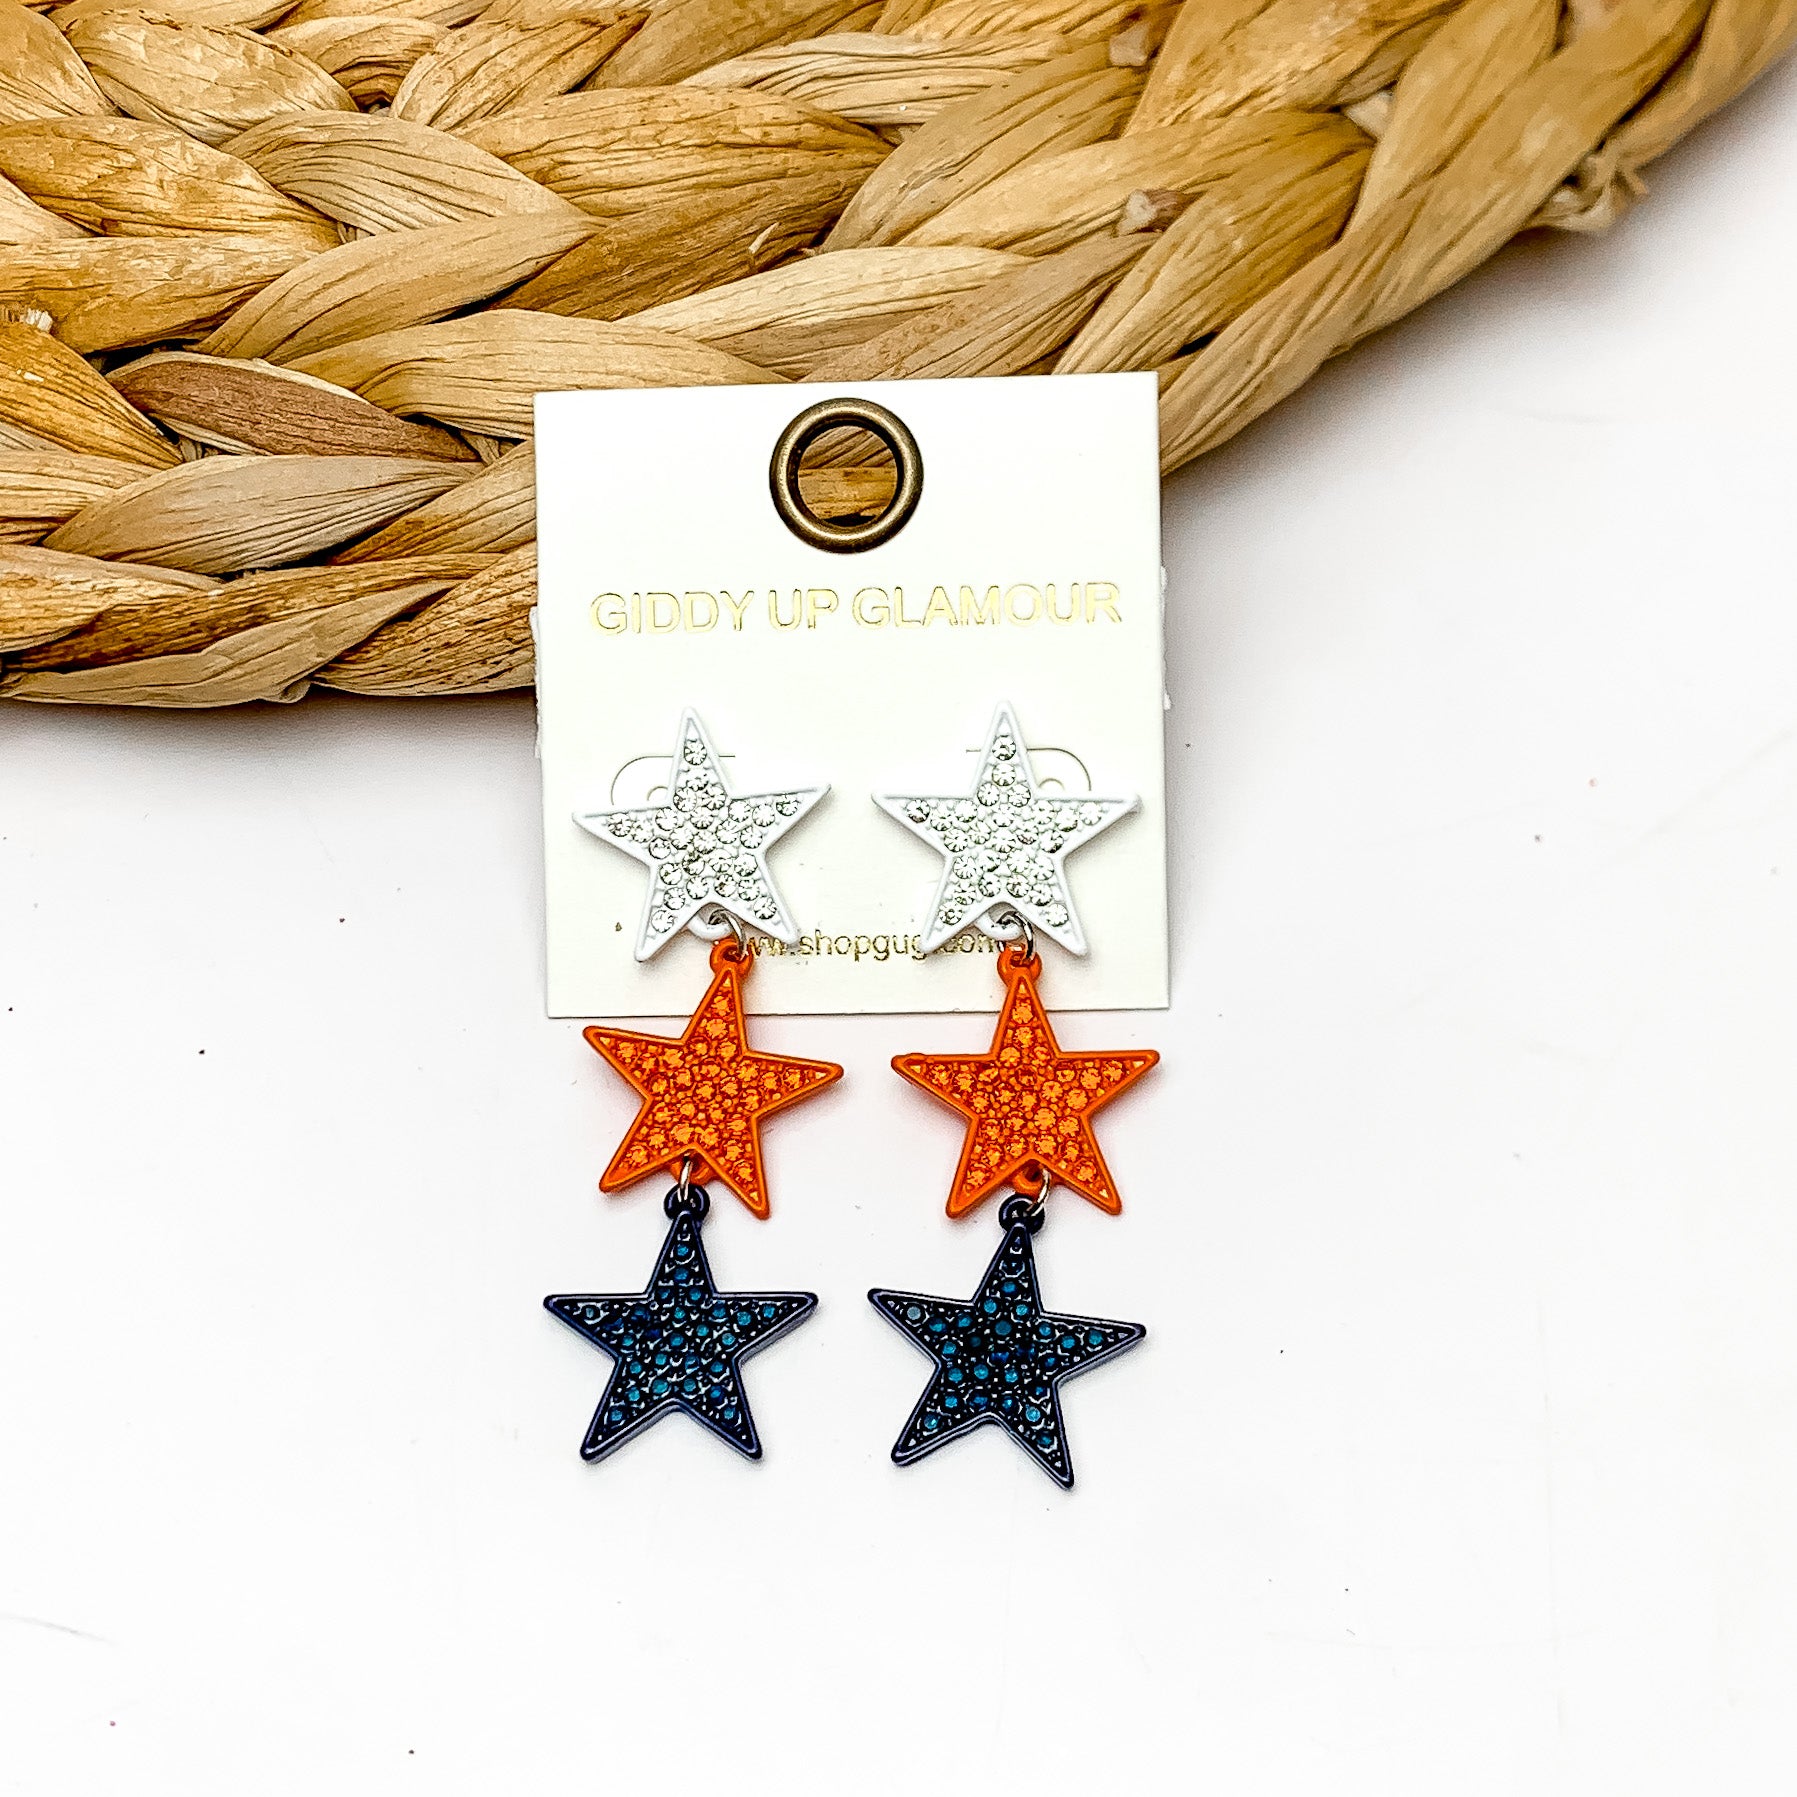 Star Shaped Three Tier Earrings in White, Orange, and Navy. The earrings are laying against a woven piece. The background of the picture is white.